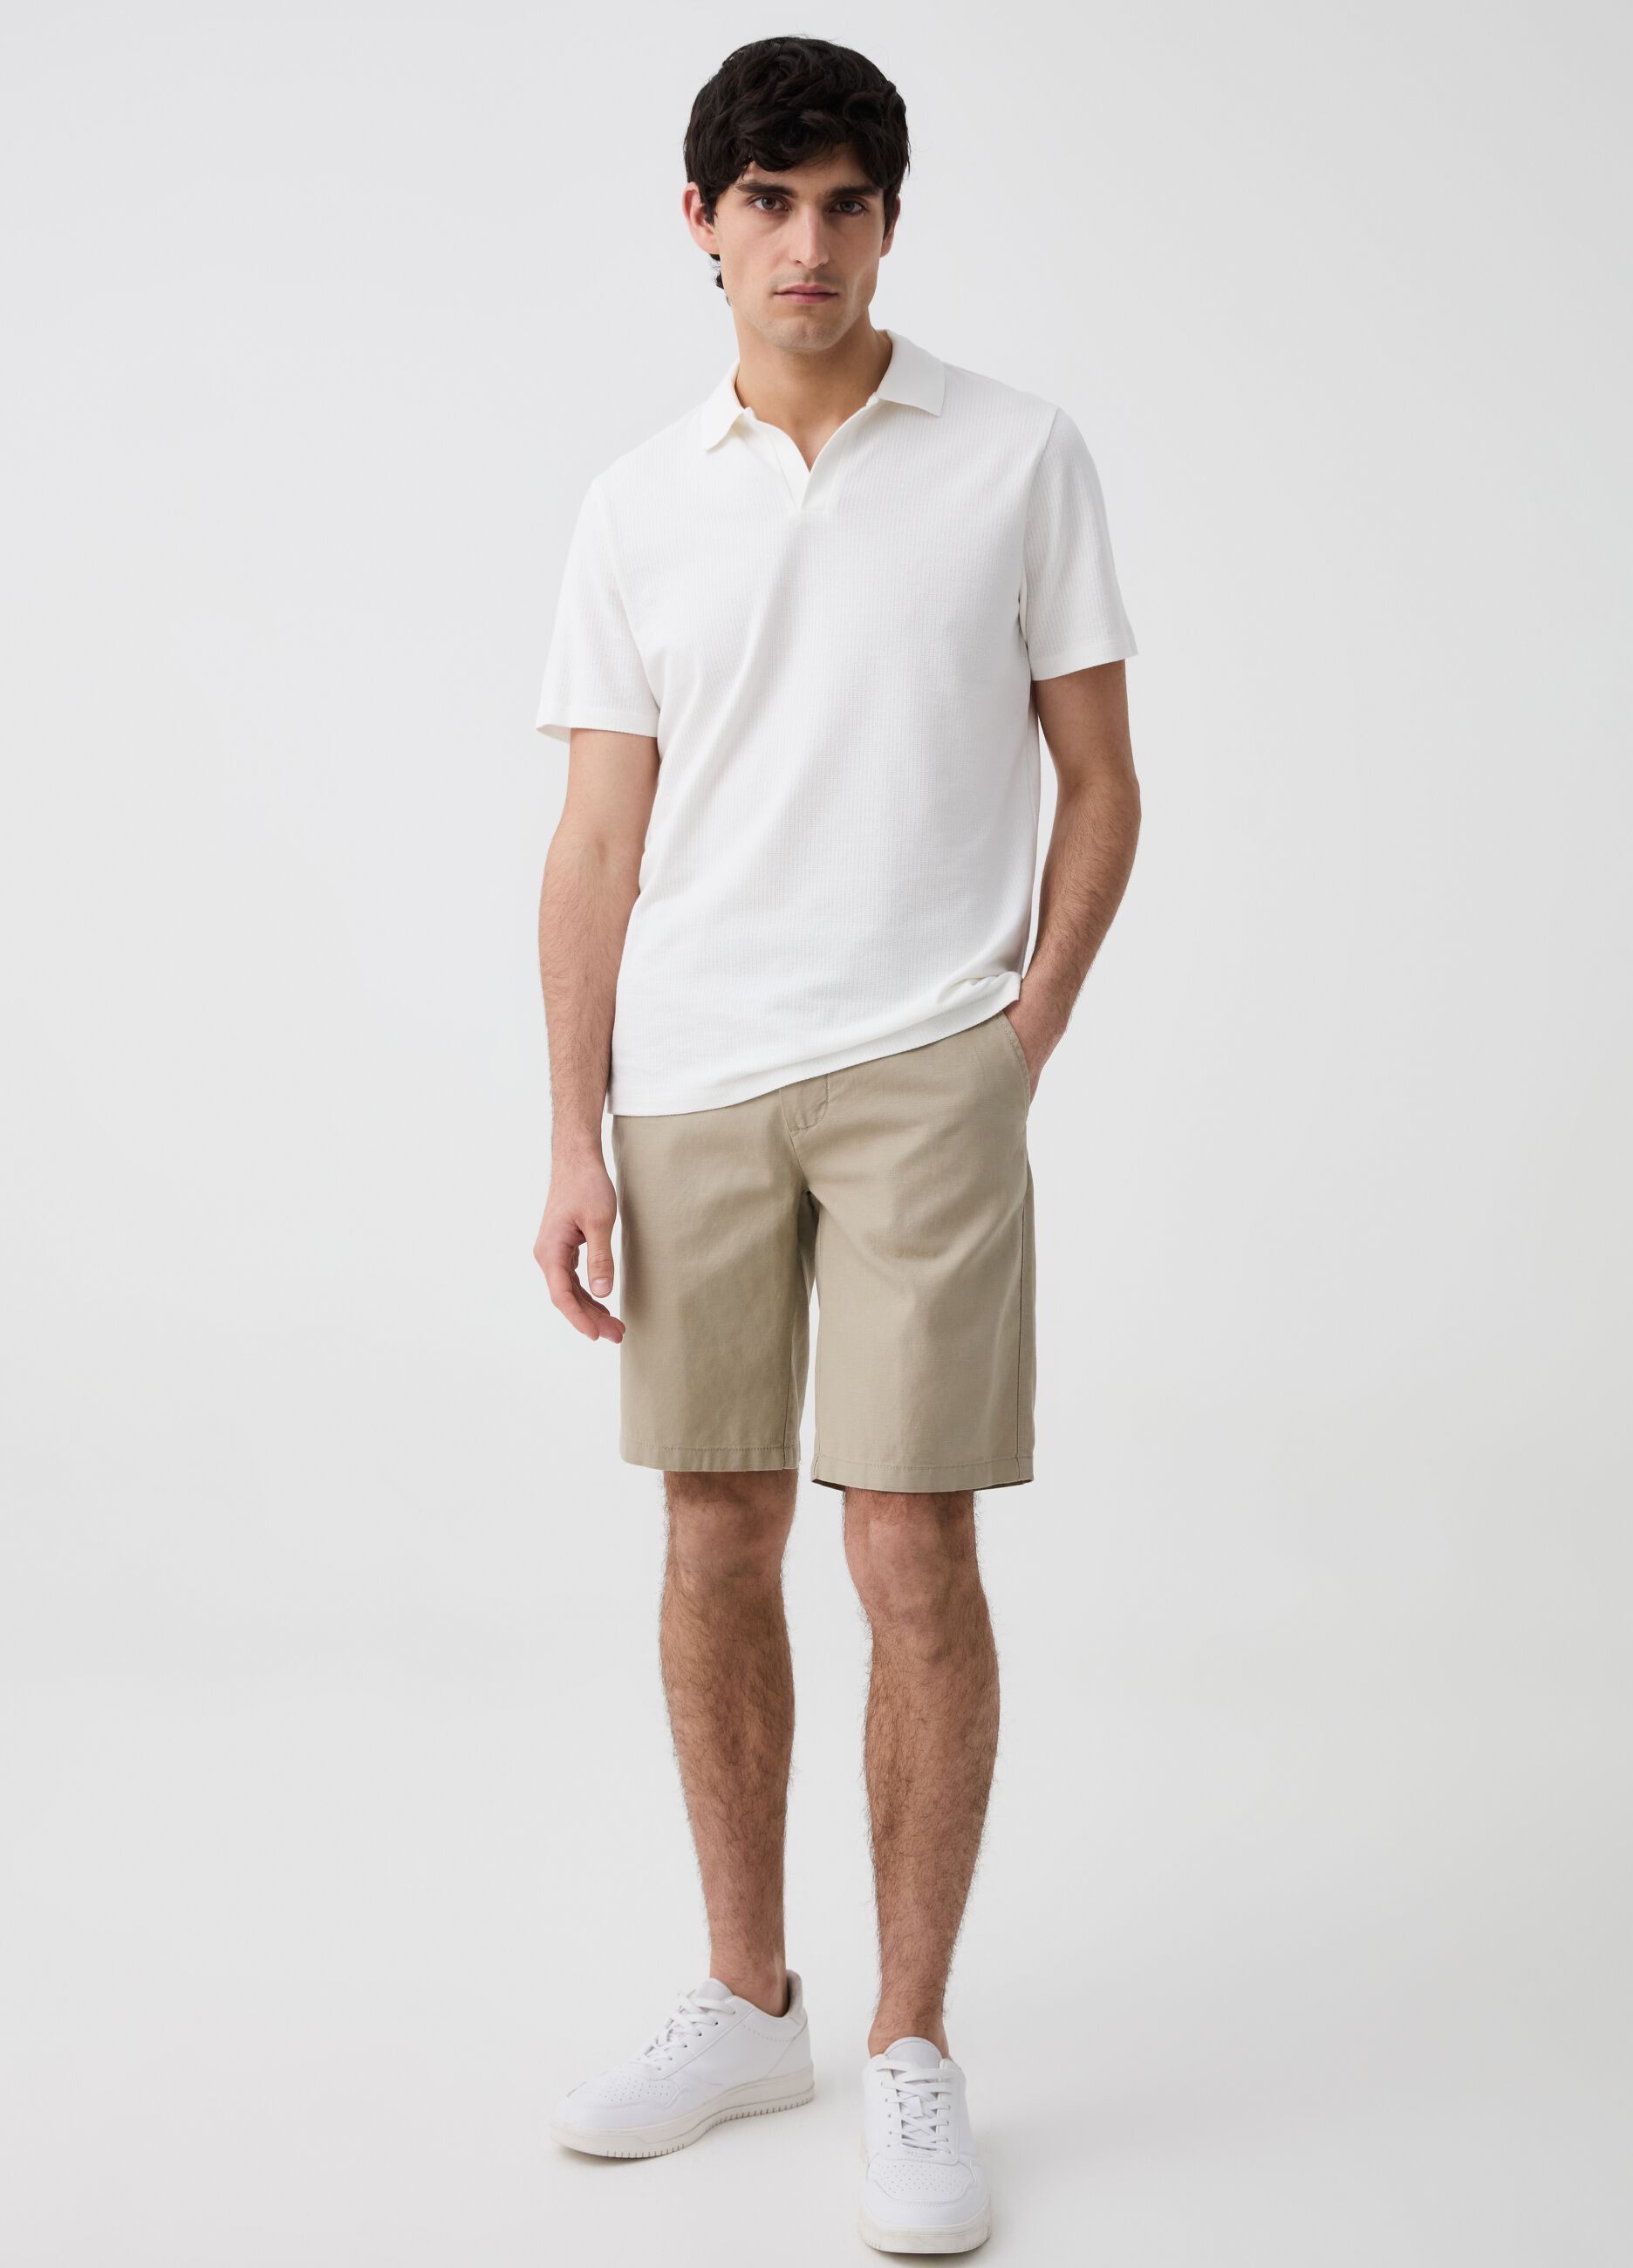 Bermuda shorts in linen and cotton